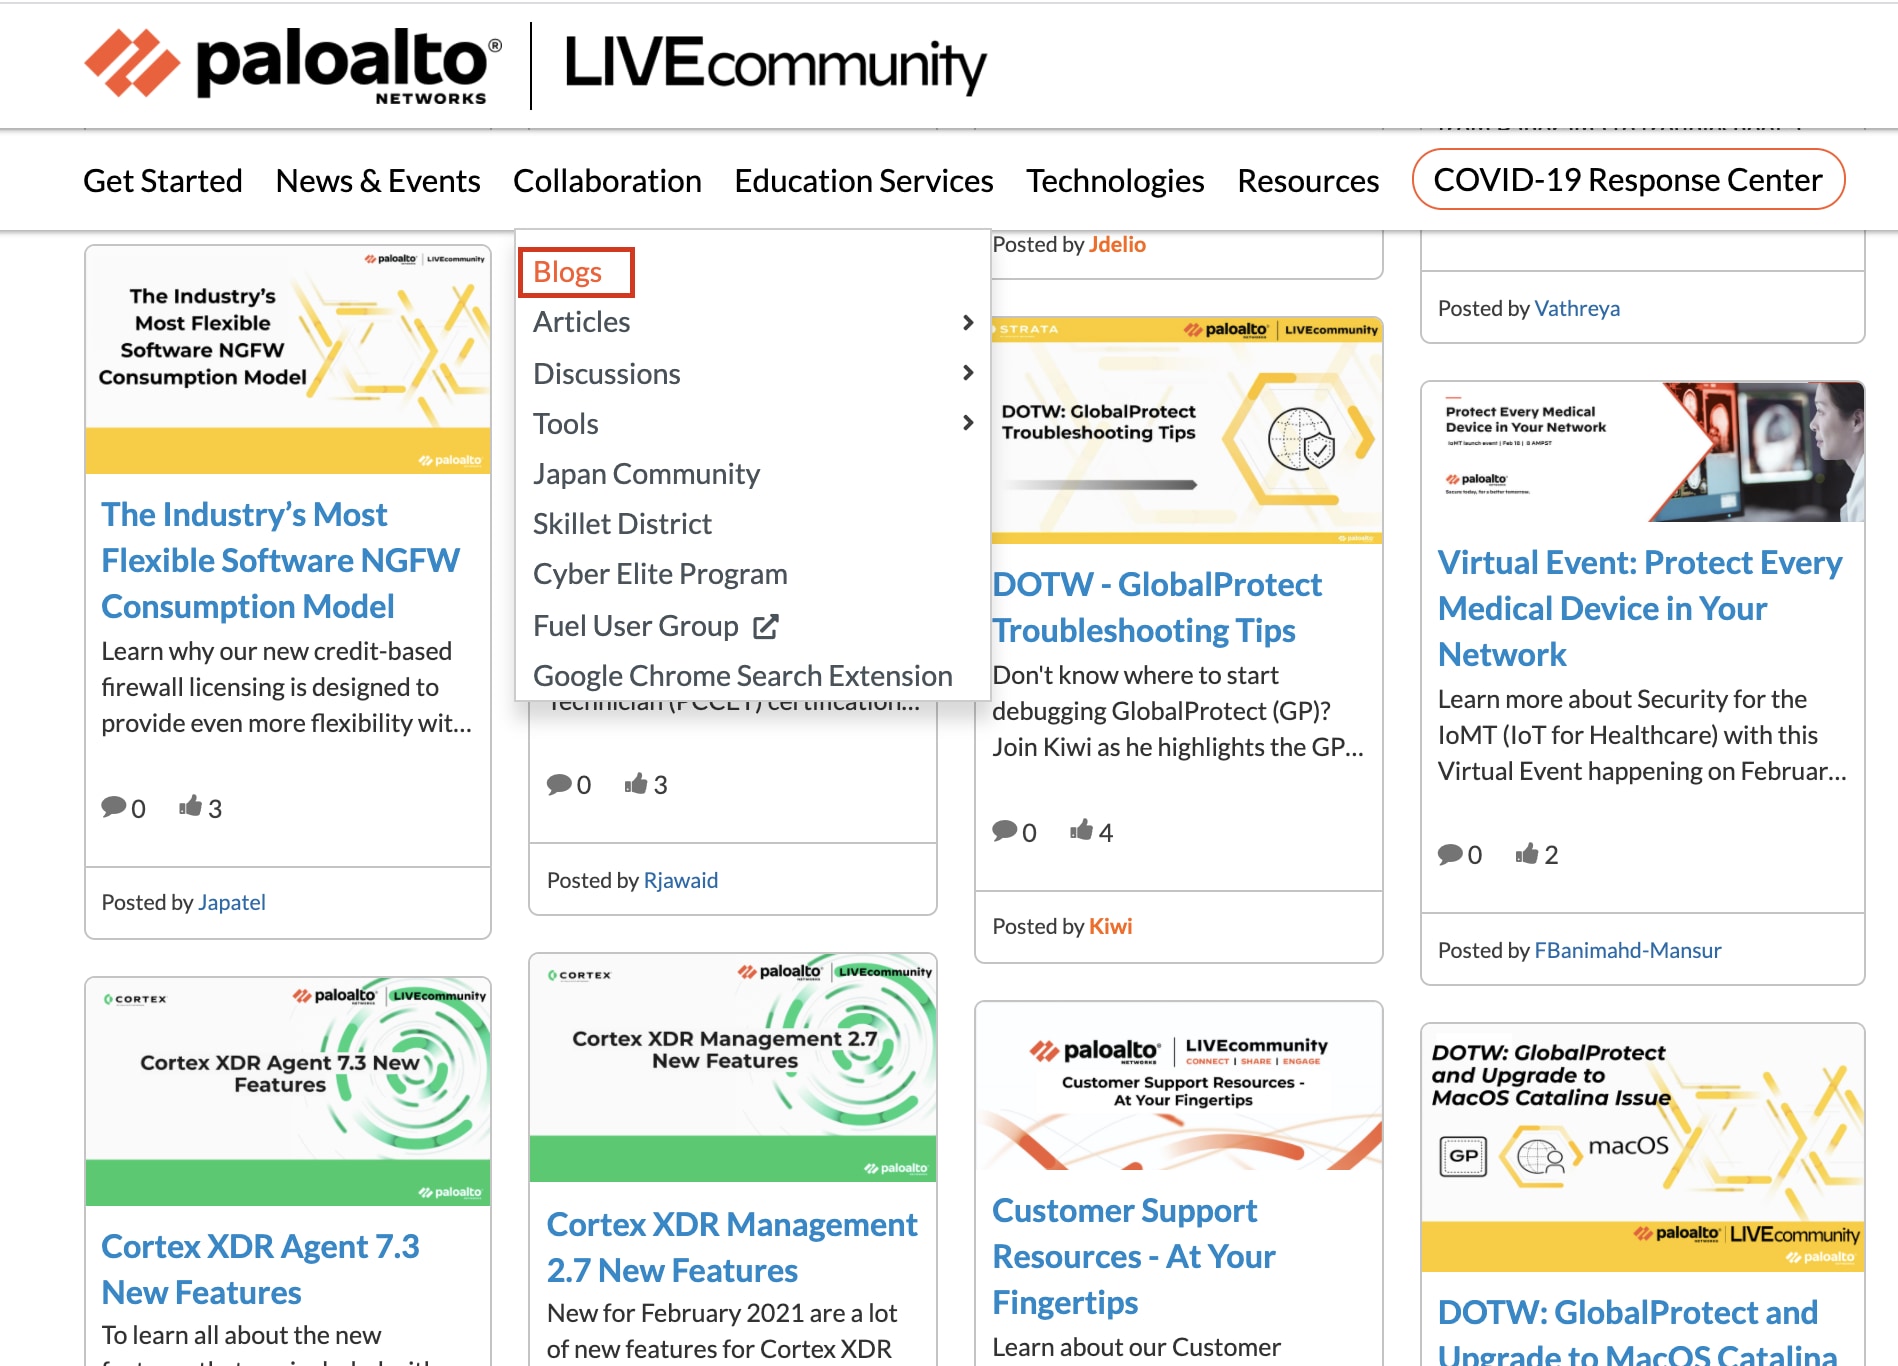 The screenshot shows how to access blogs within LIVEcommunity. 